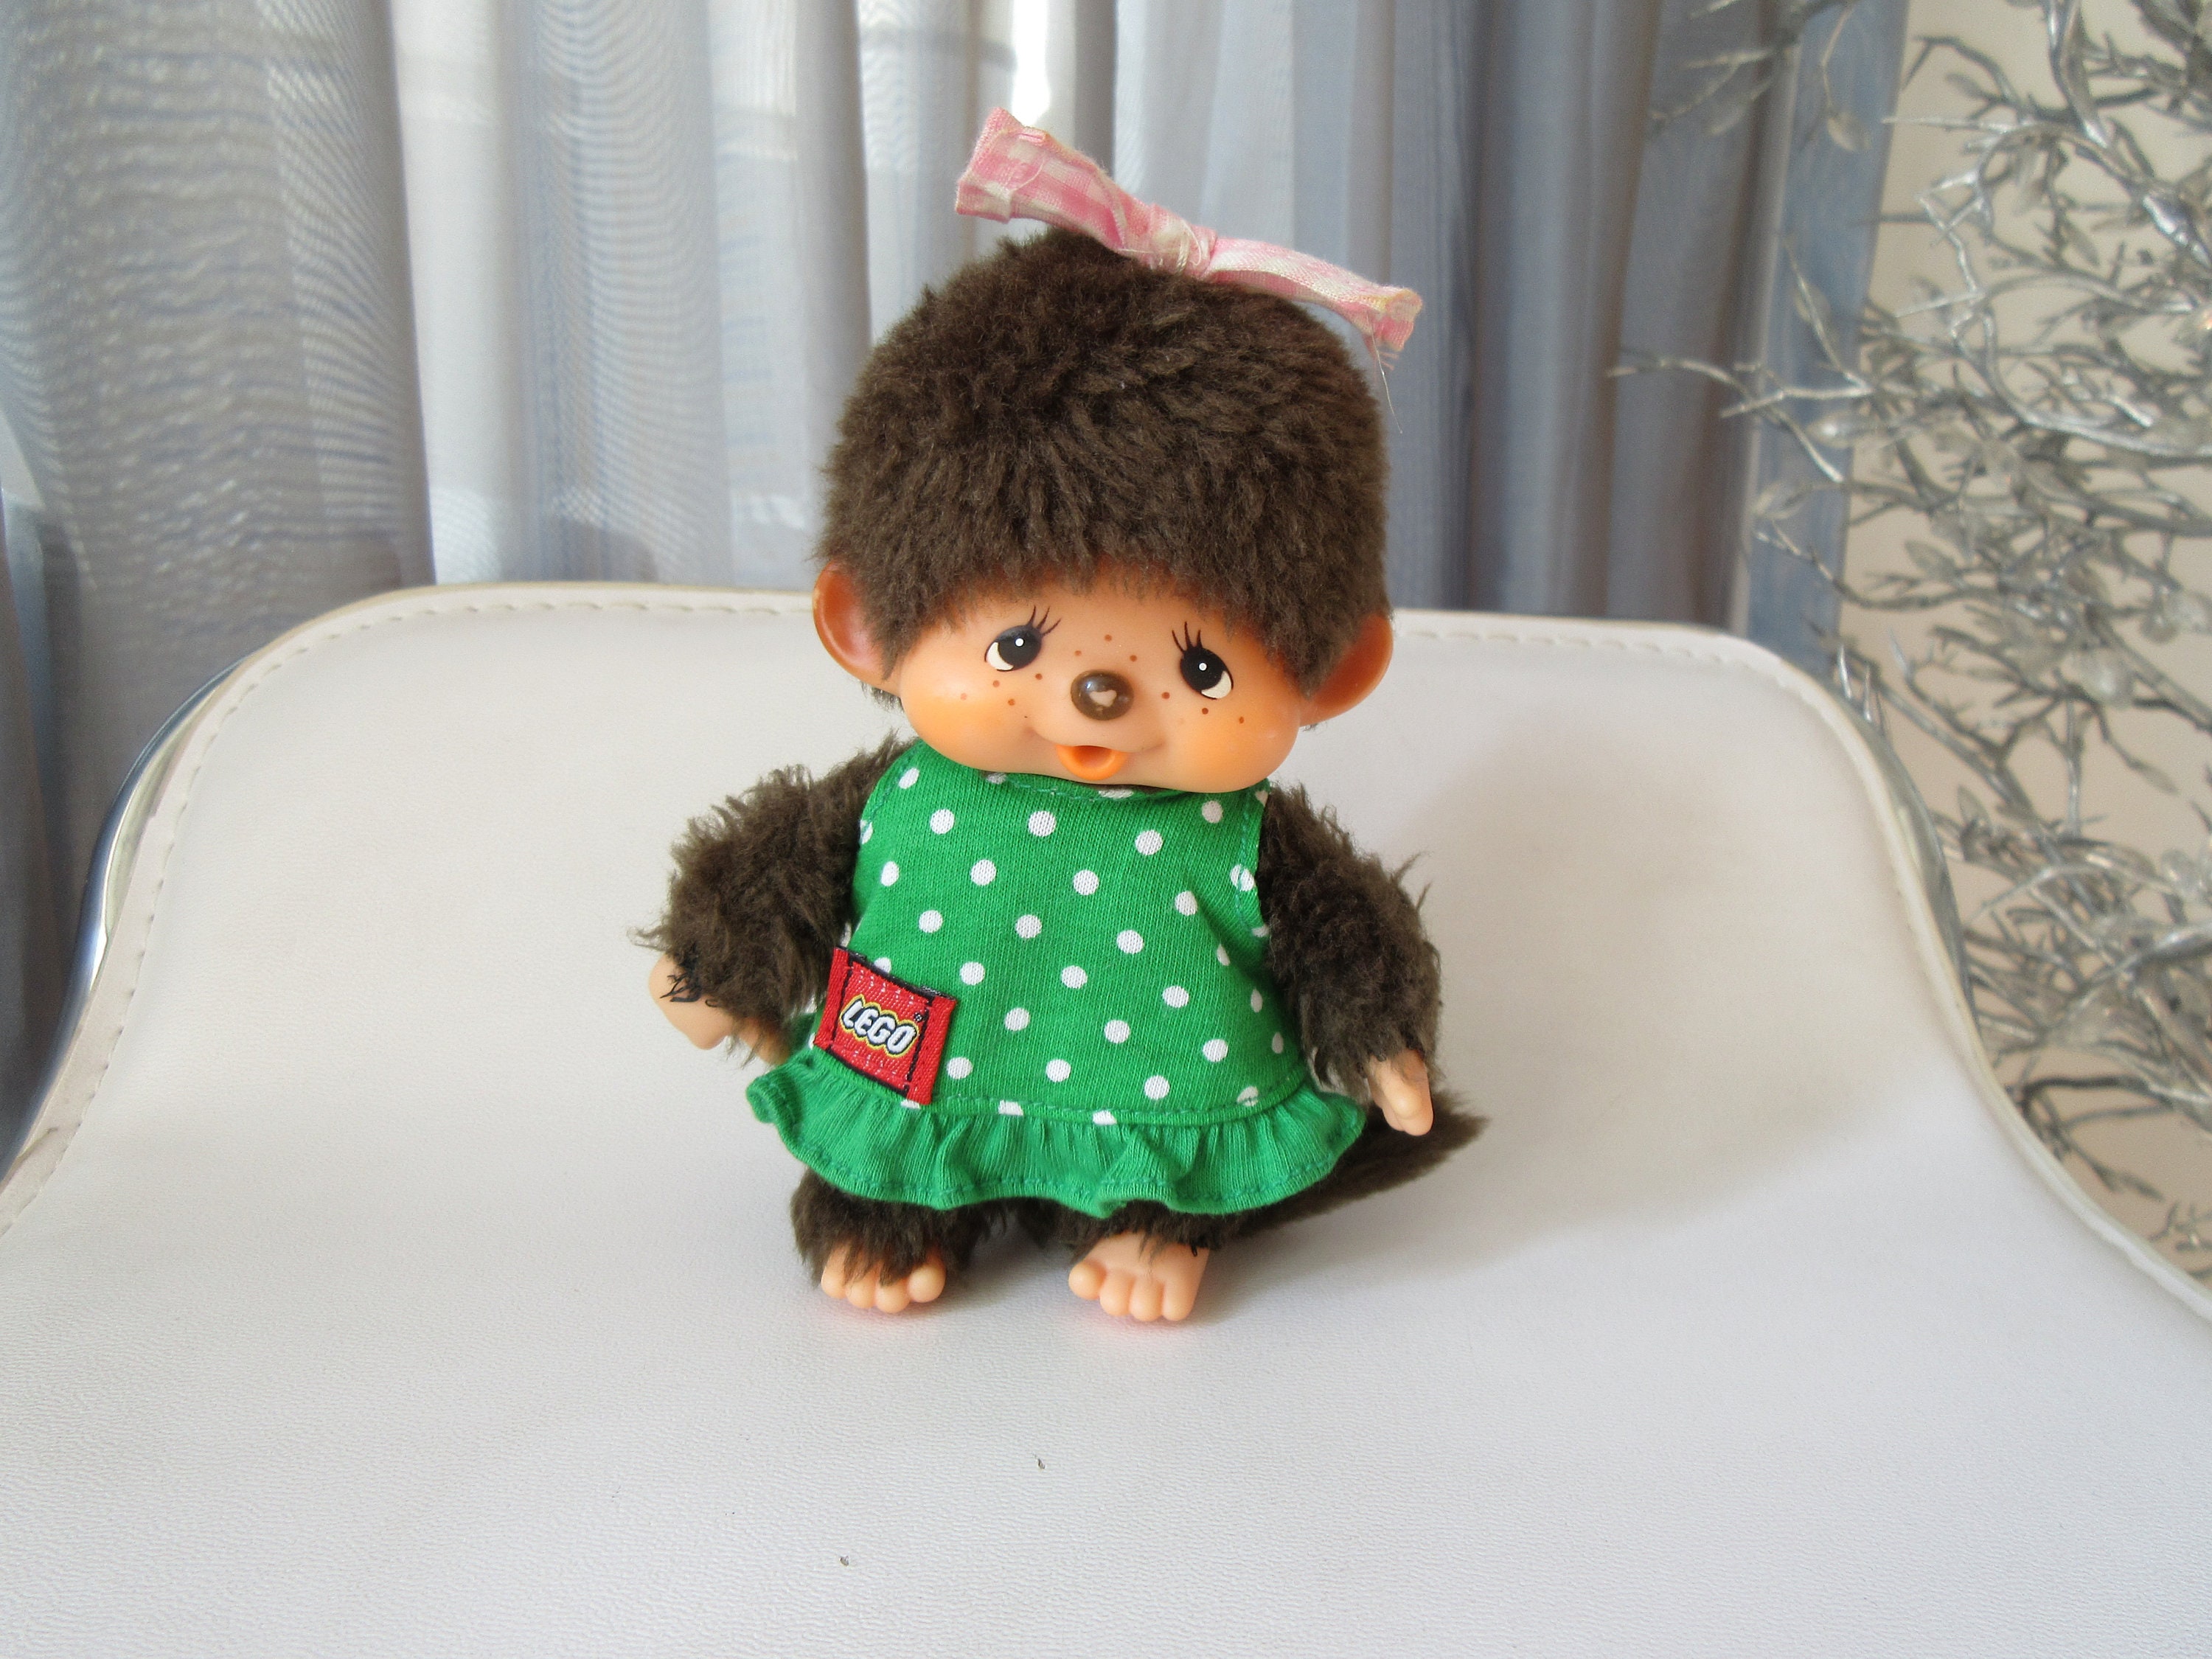 Vintage Sekiguchi Japanese Doll in Overalls with Tag Made in Tokyo Japan  Rare